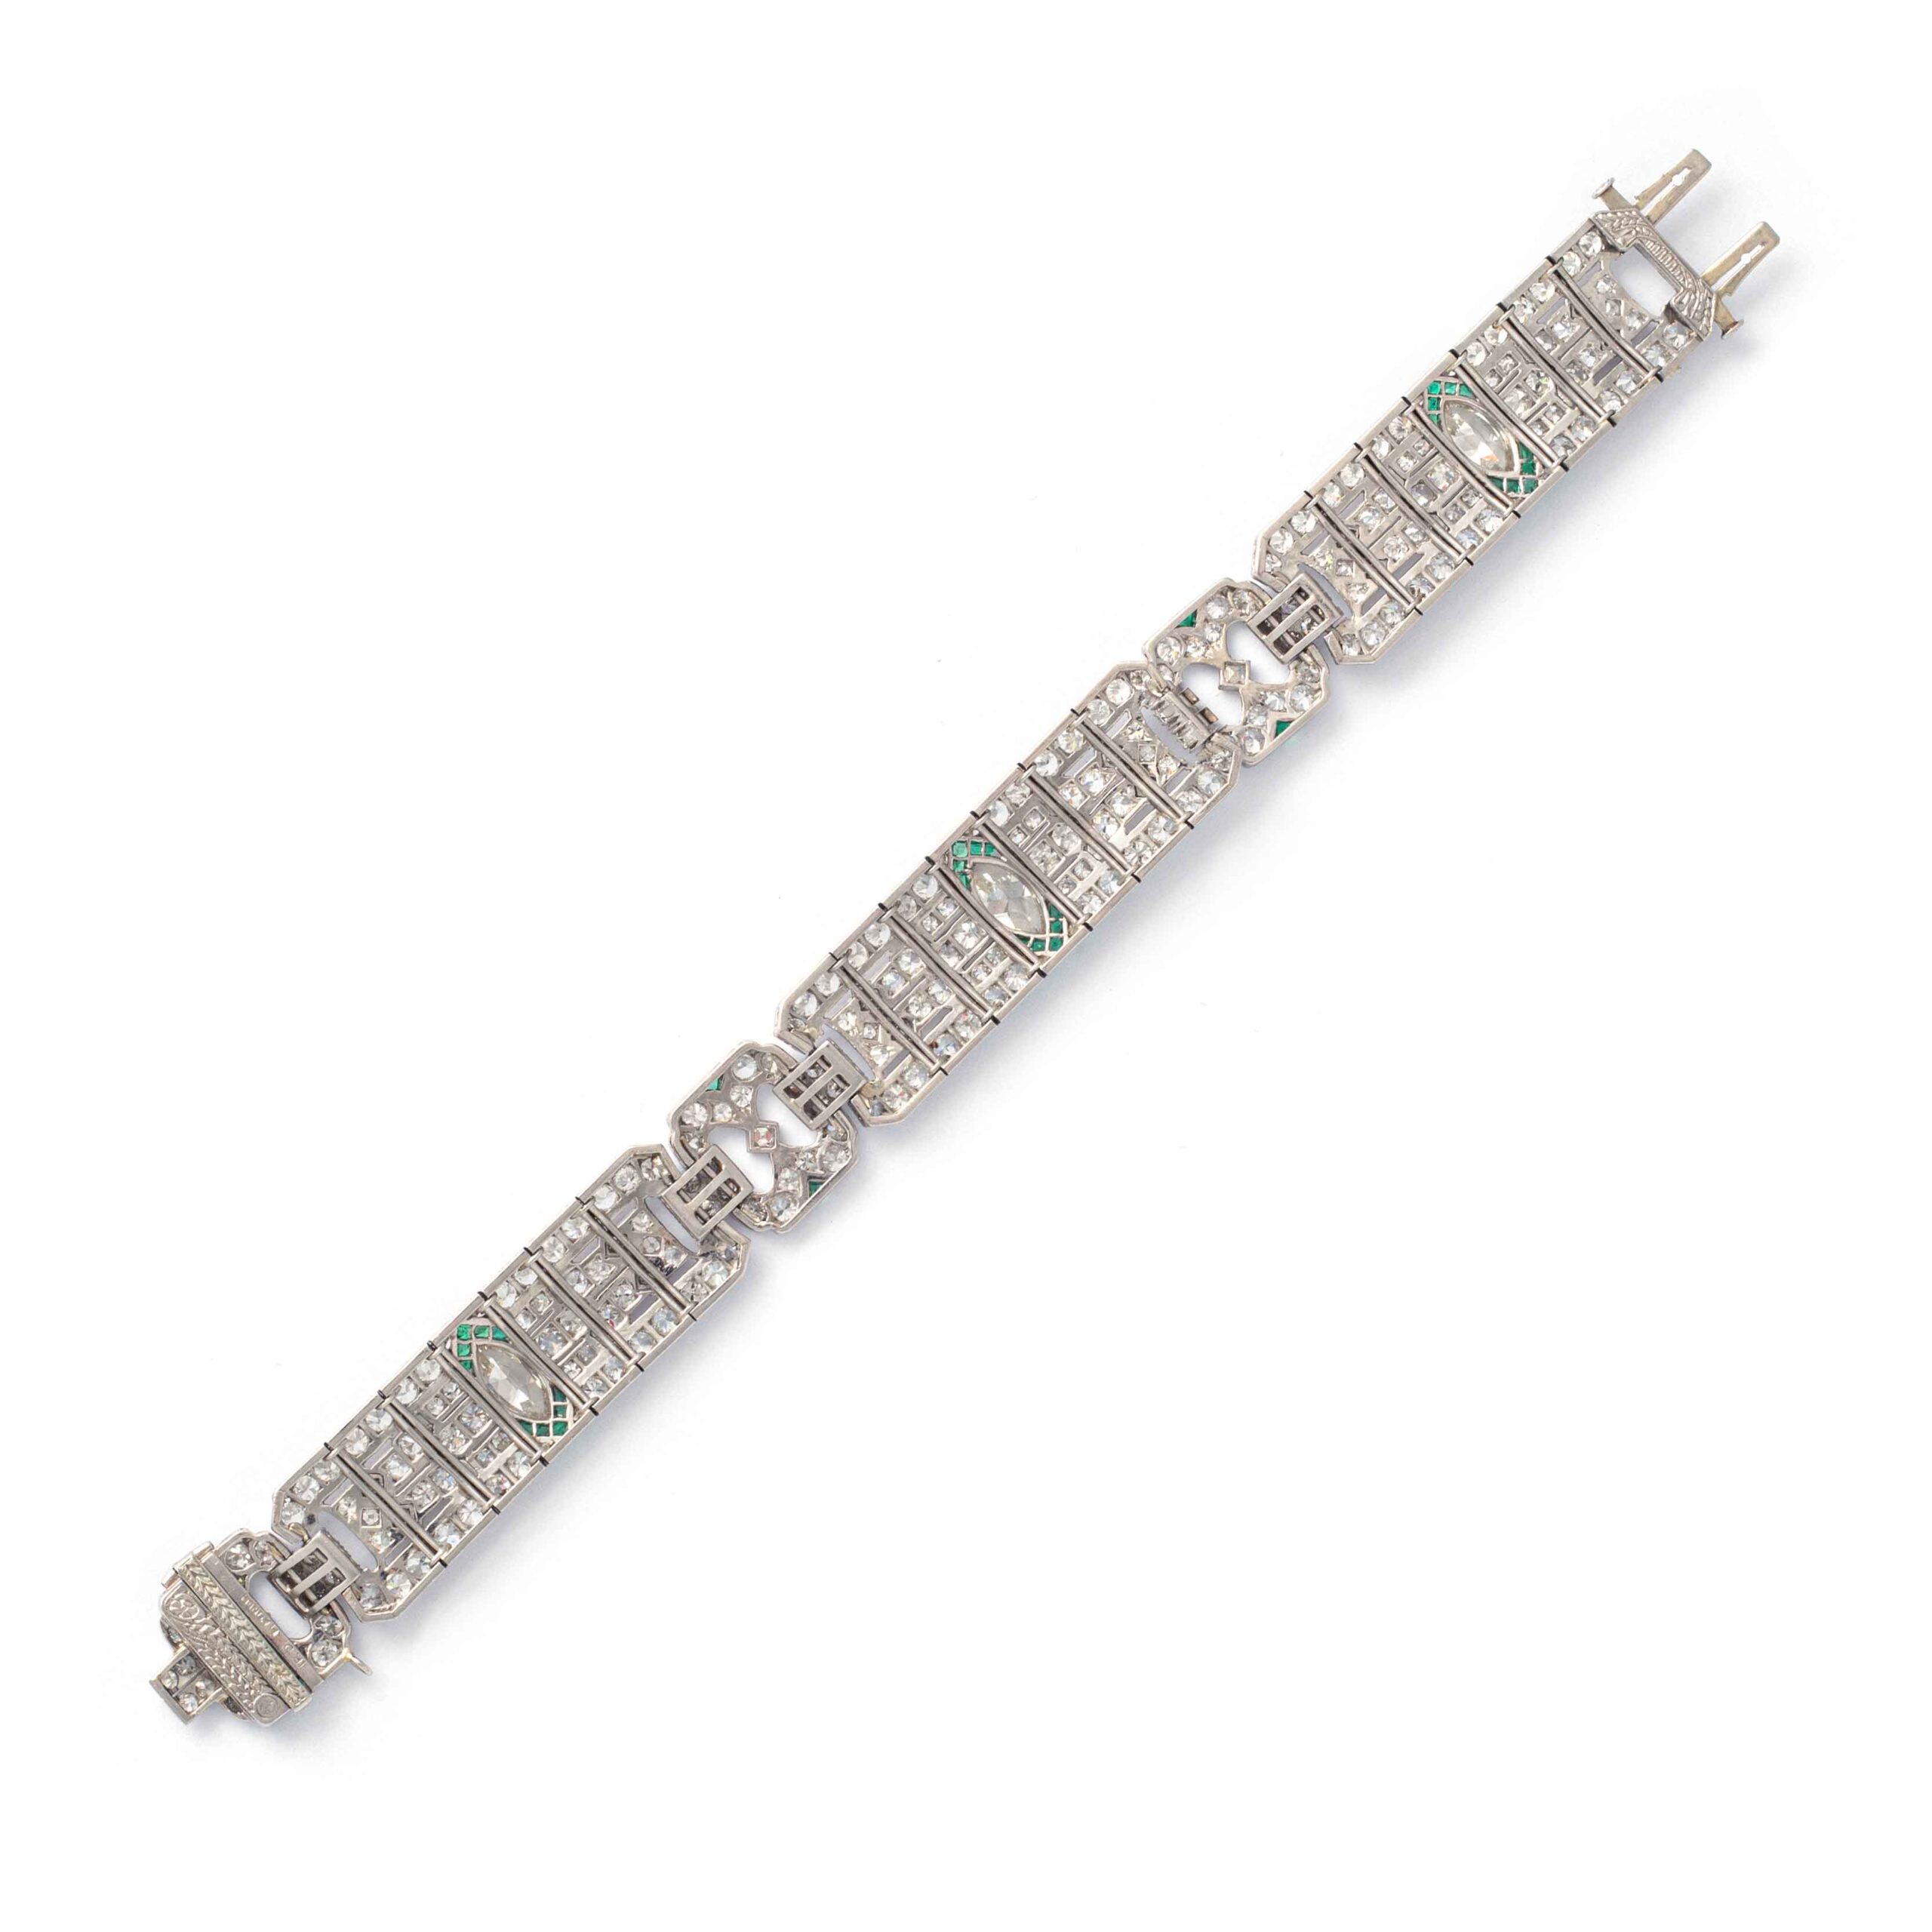 Back view of a Art Deco Bracelet in Platinum set with Diamonds and Emeralds. American work from Circa 1930.